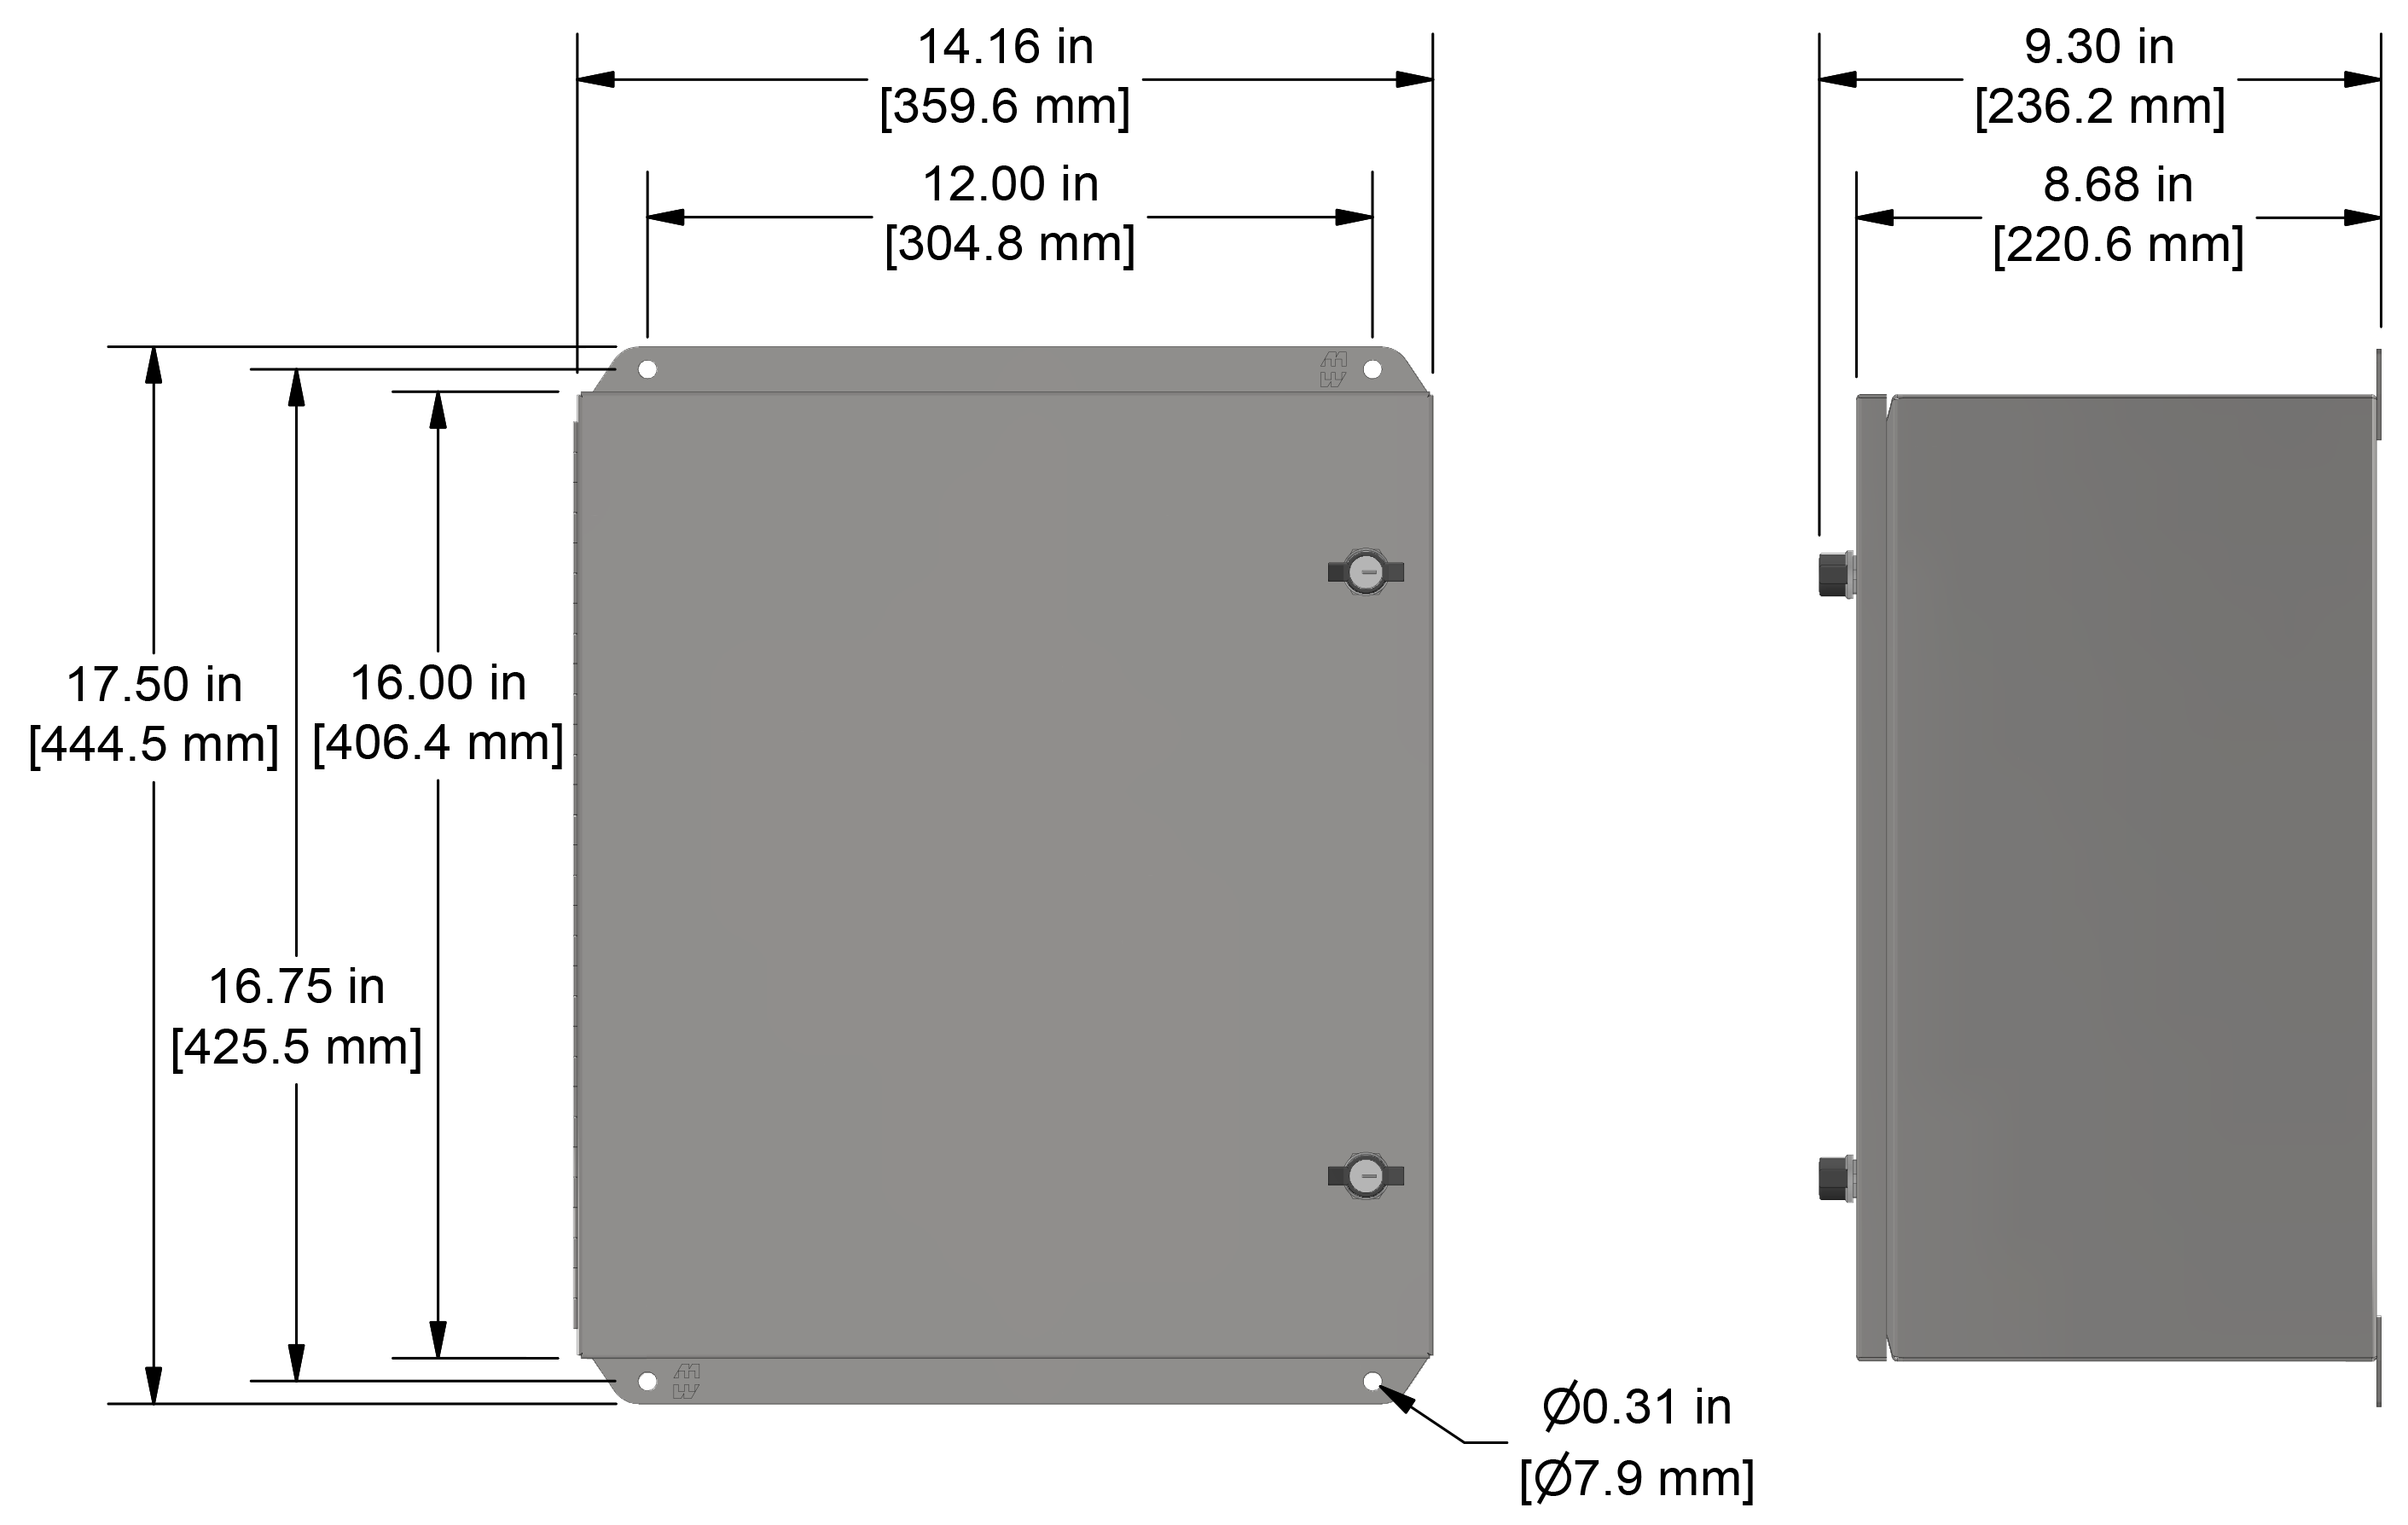 A drawing showing the dimensions of a CTC JB220 Extended Capacity industrial enclosure.